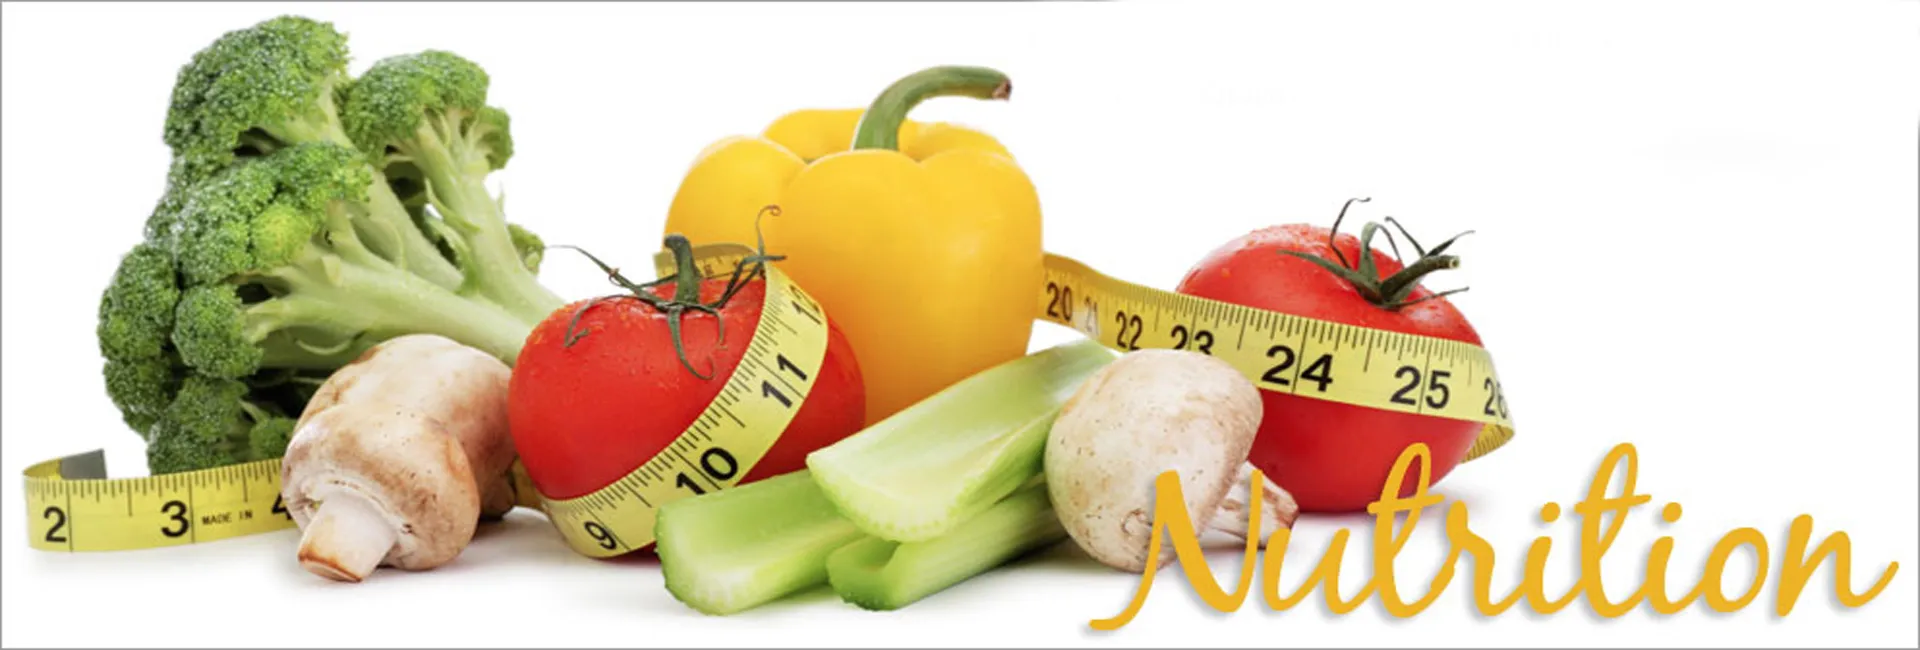 Diet For Sports Nutrition In Sharjah